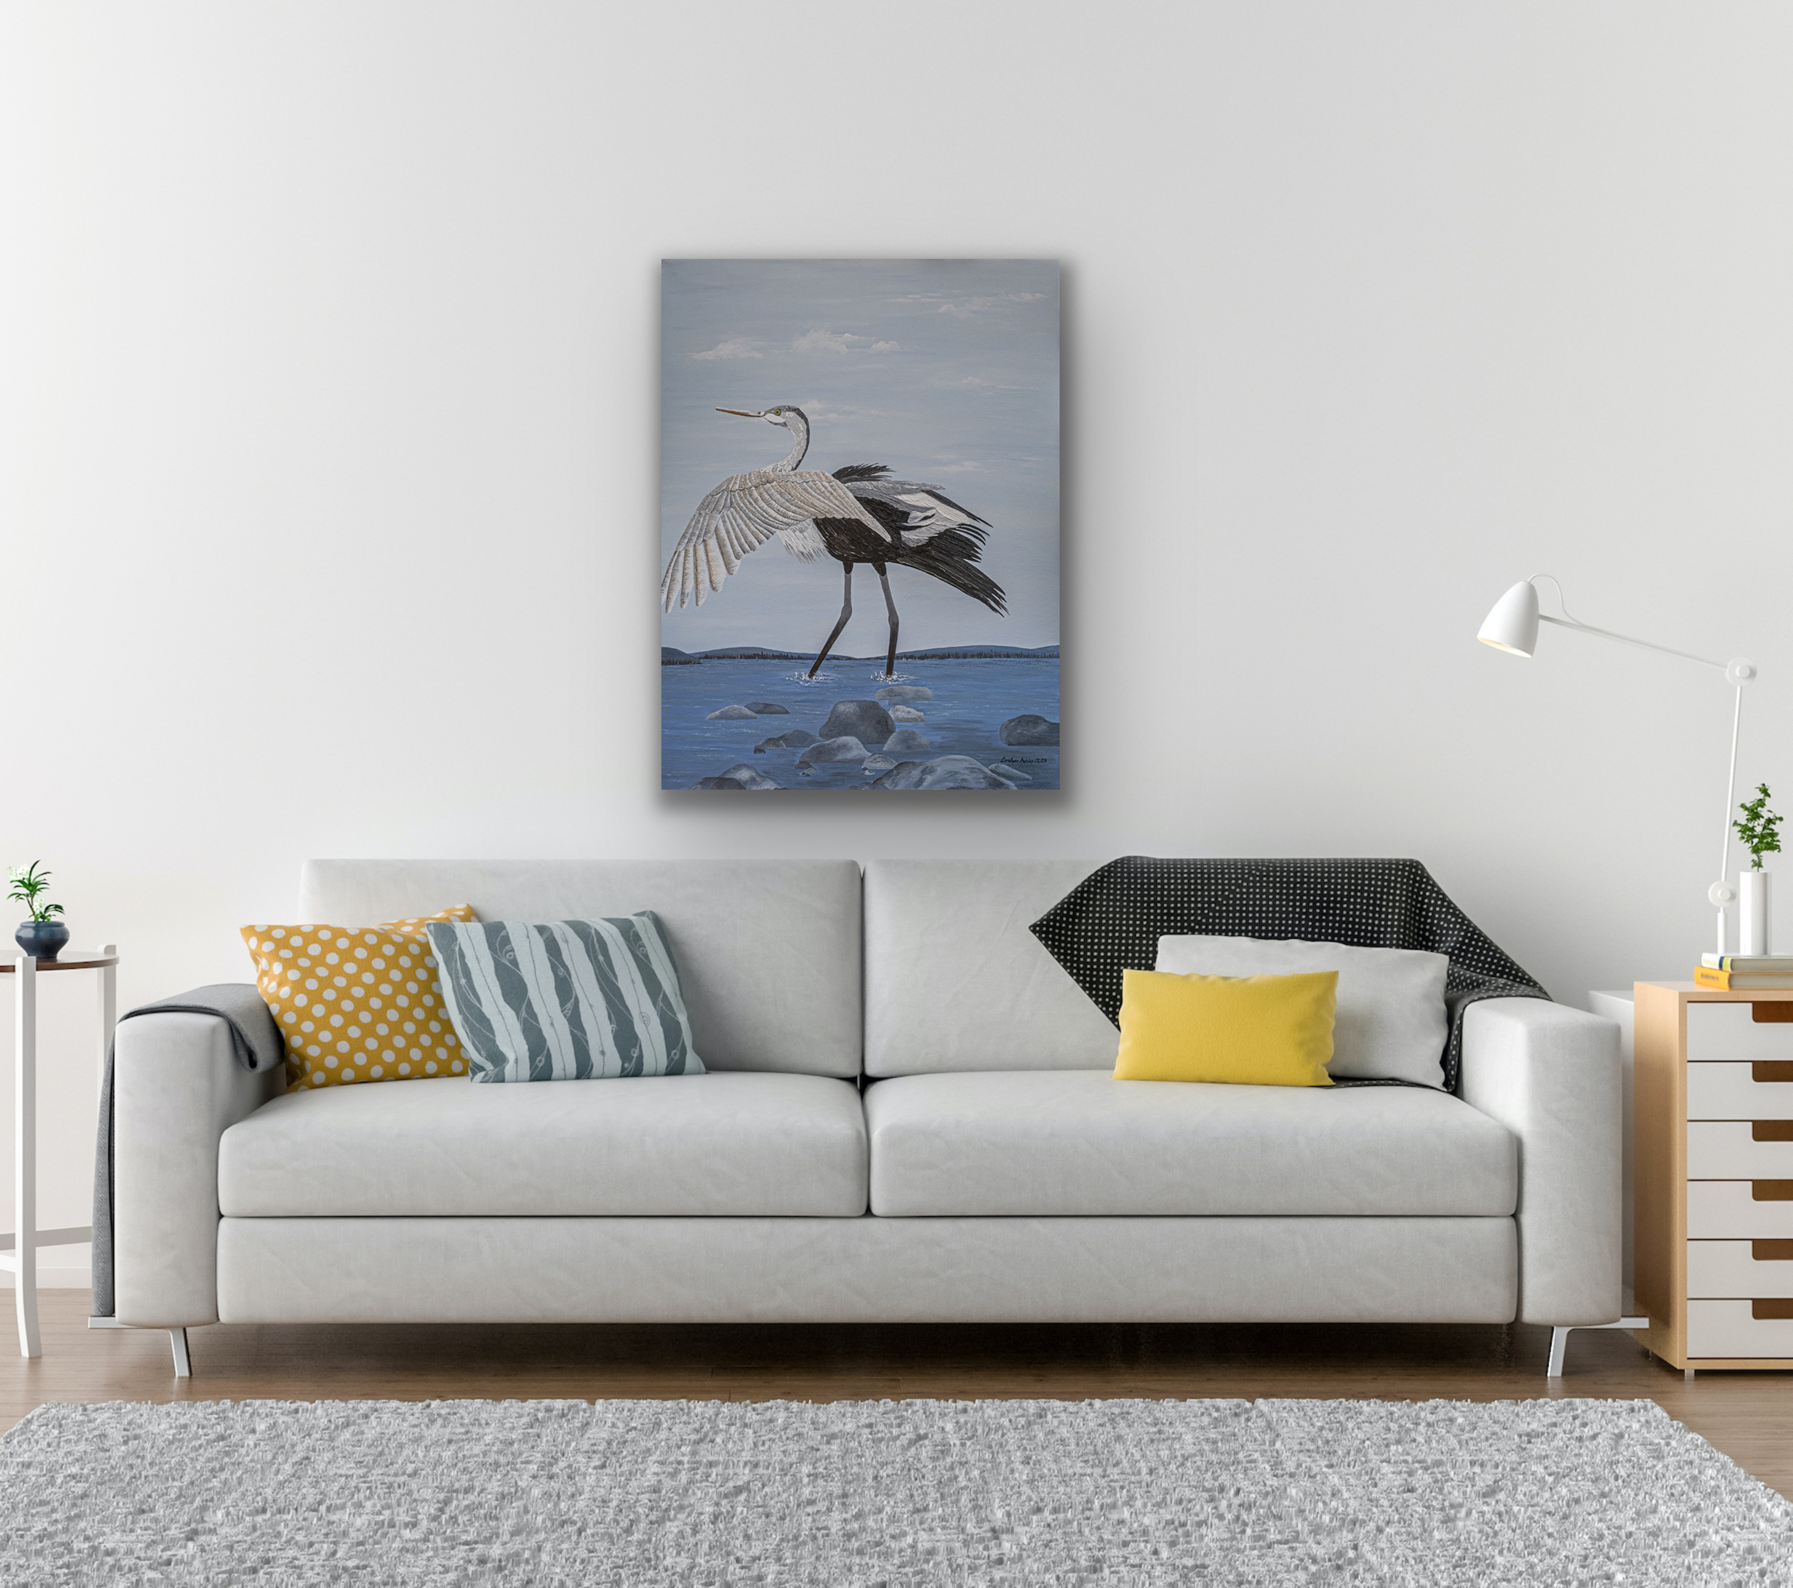 Shouldi painting will look great in your living room.